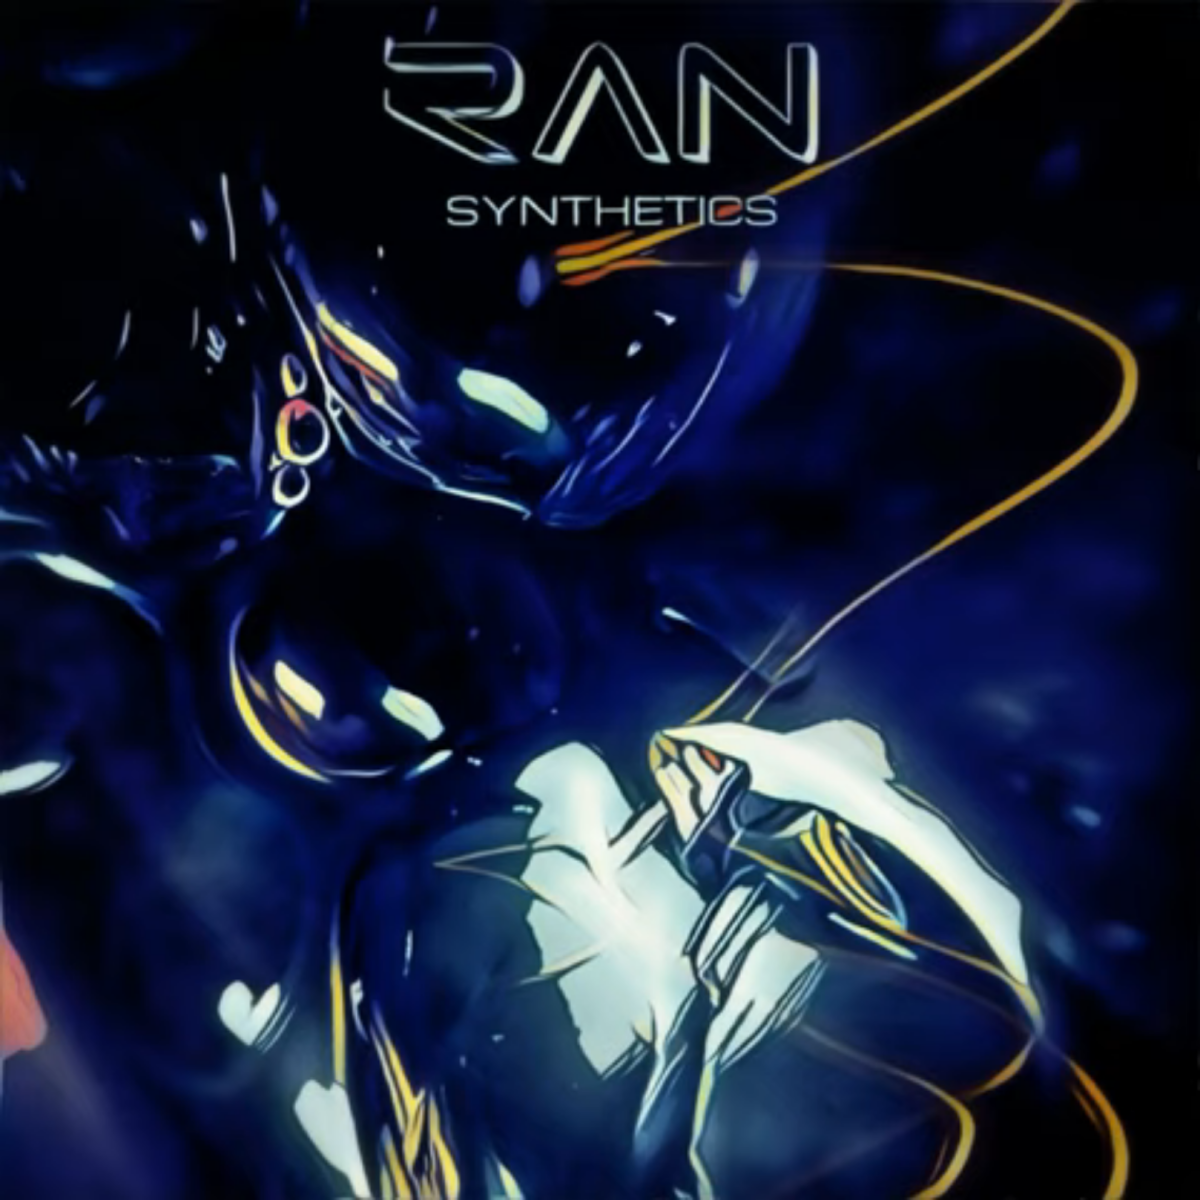 synth-ep-review-synthetics-by-ran